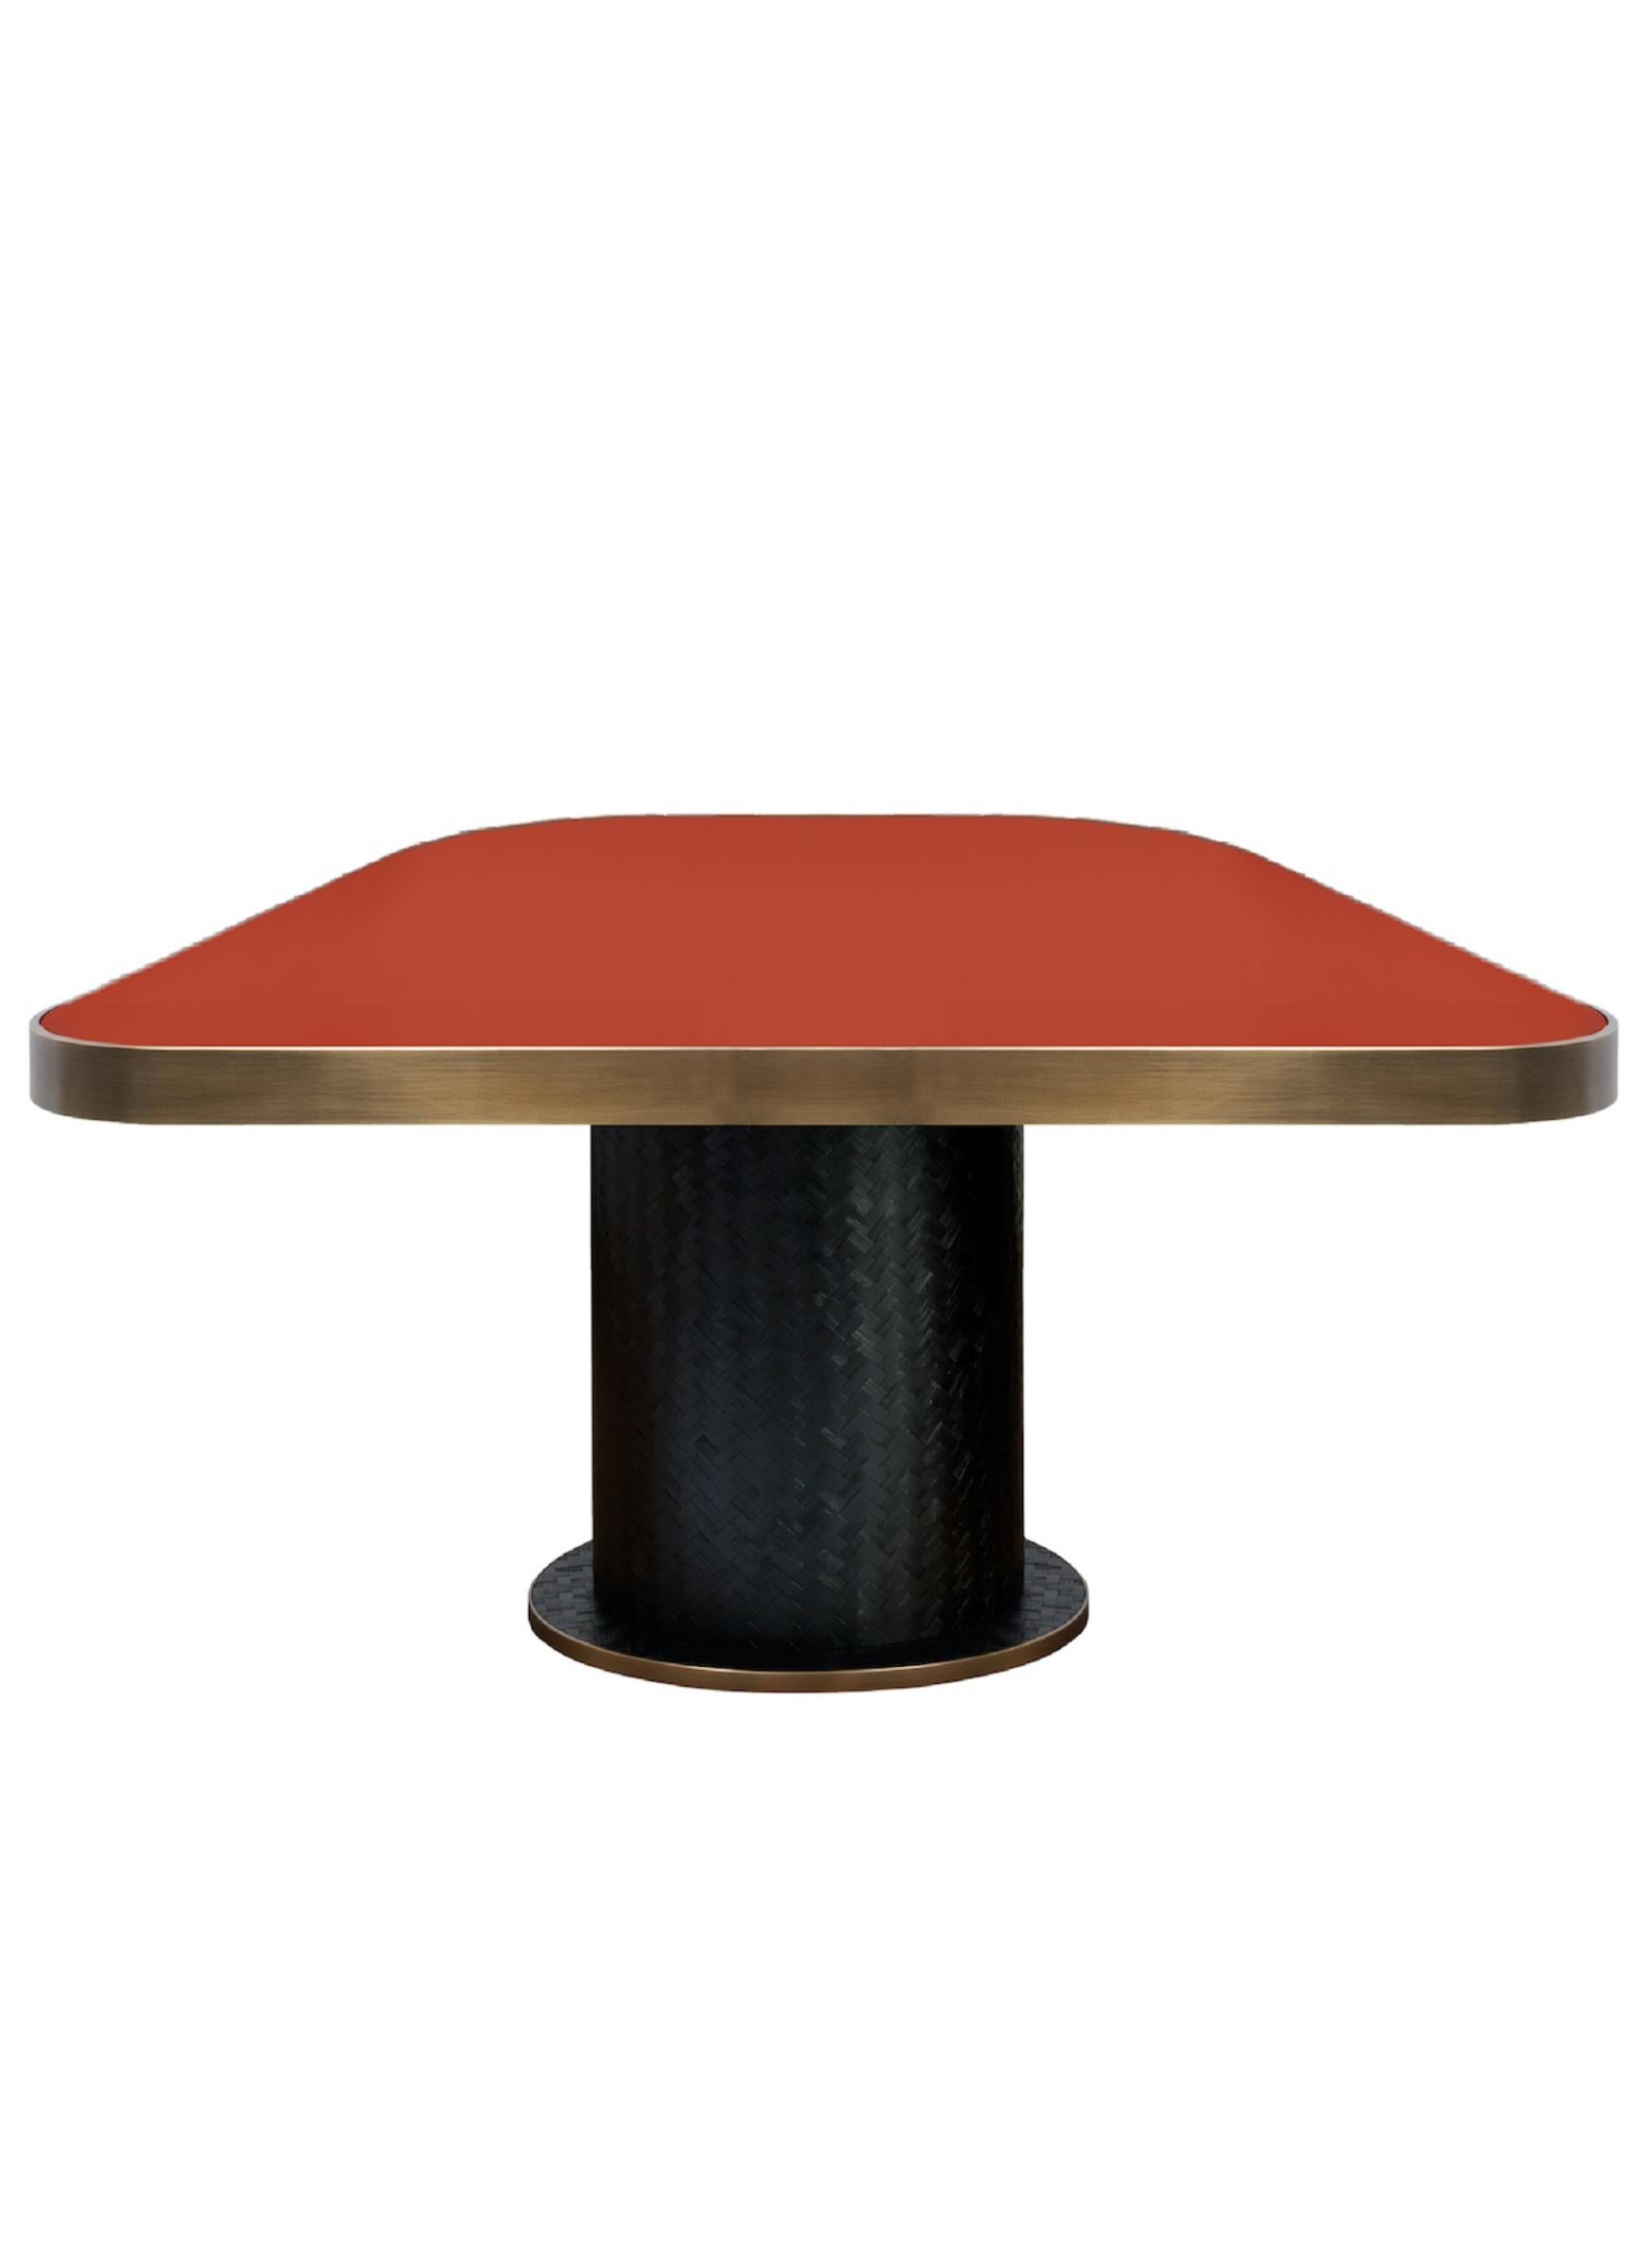 Other Sanayi313 Table by Sanayi 313 For Sale